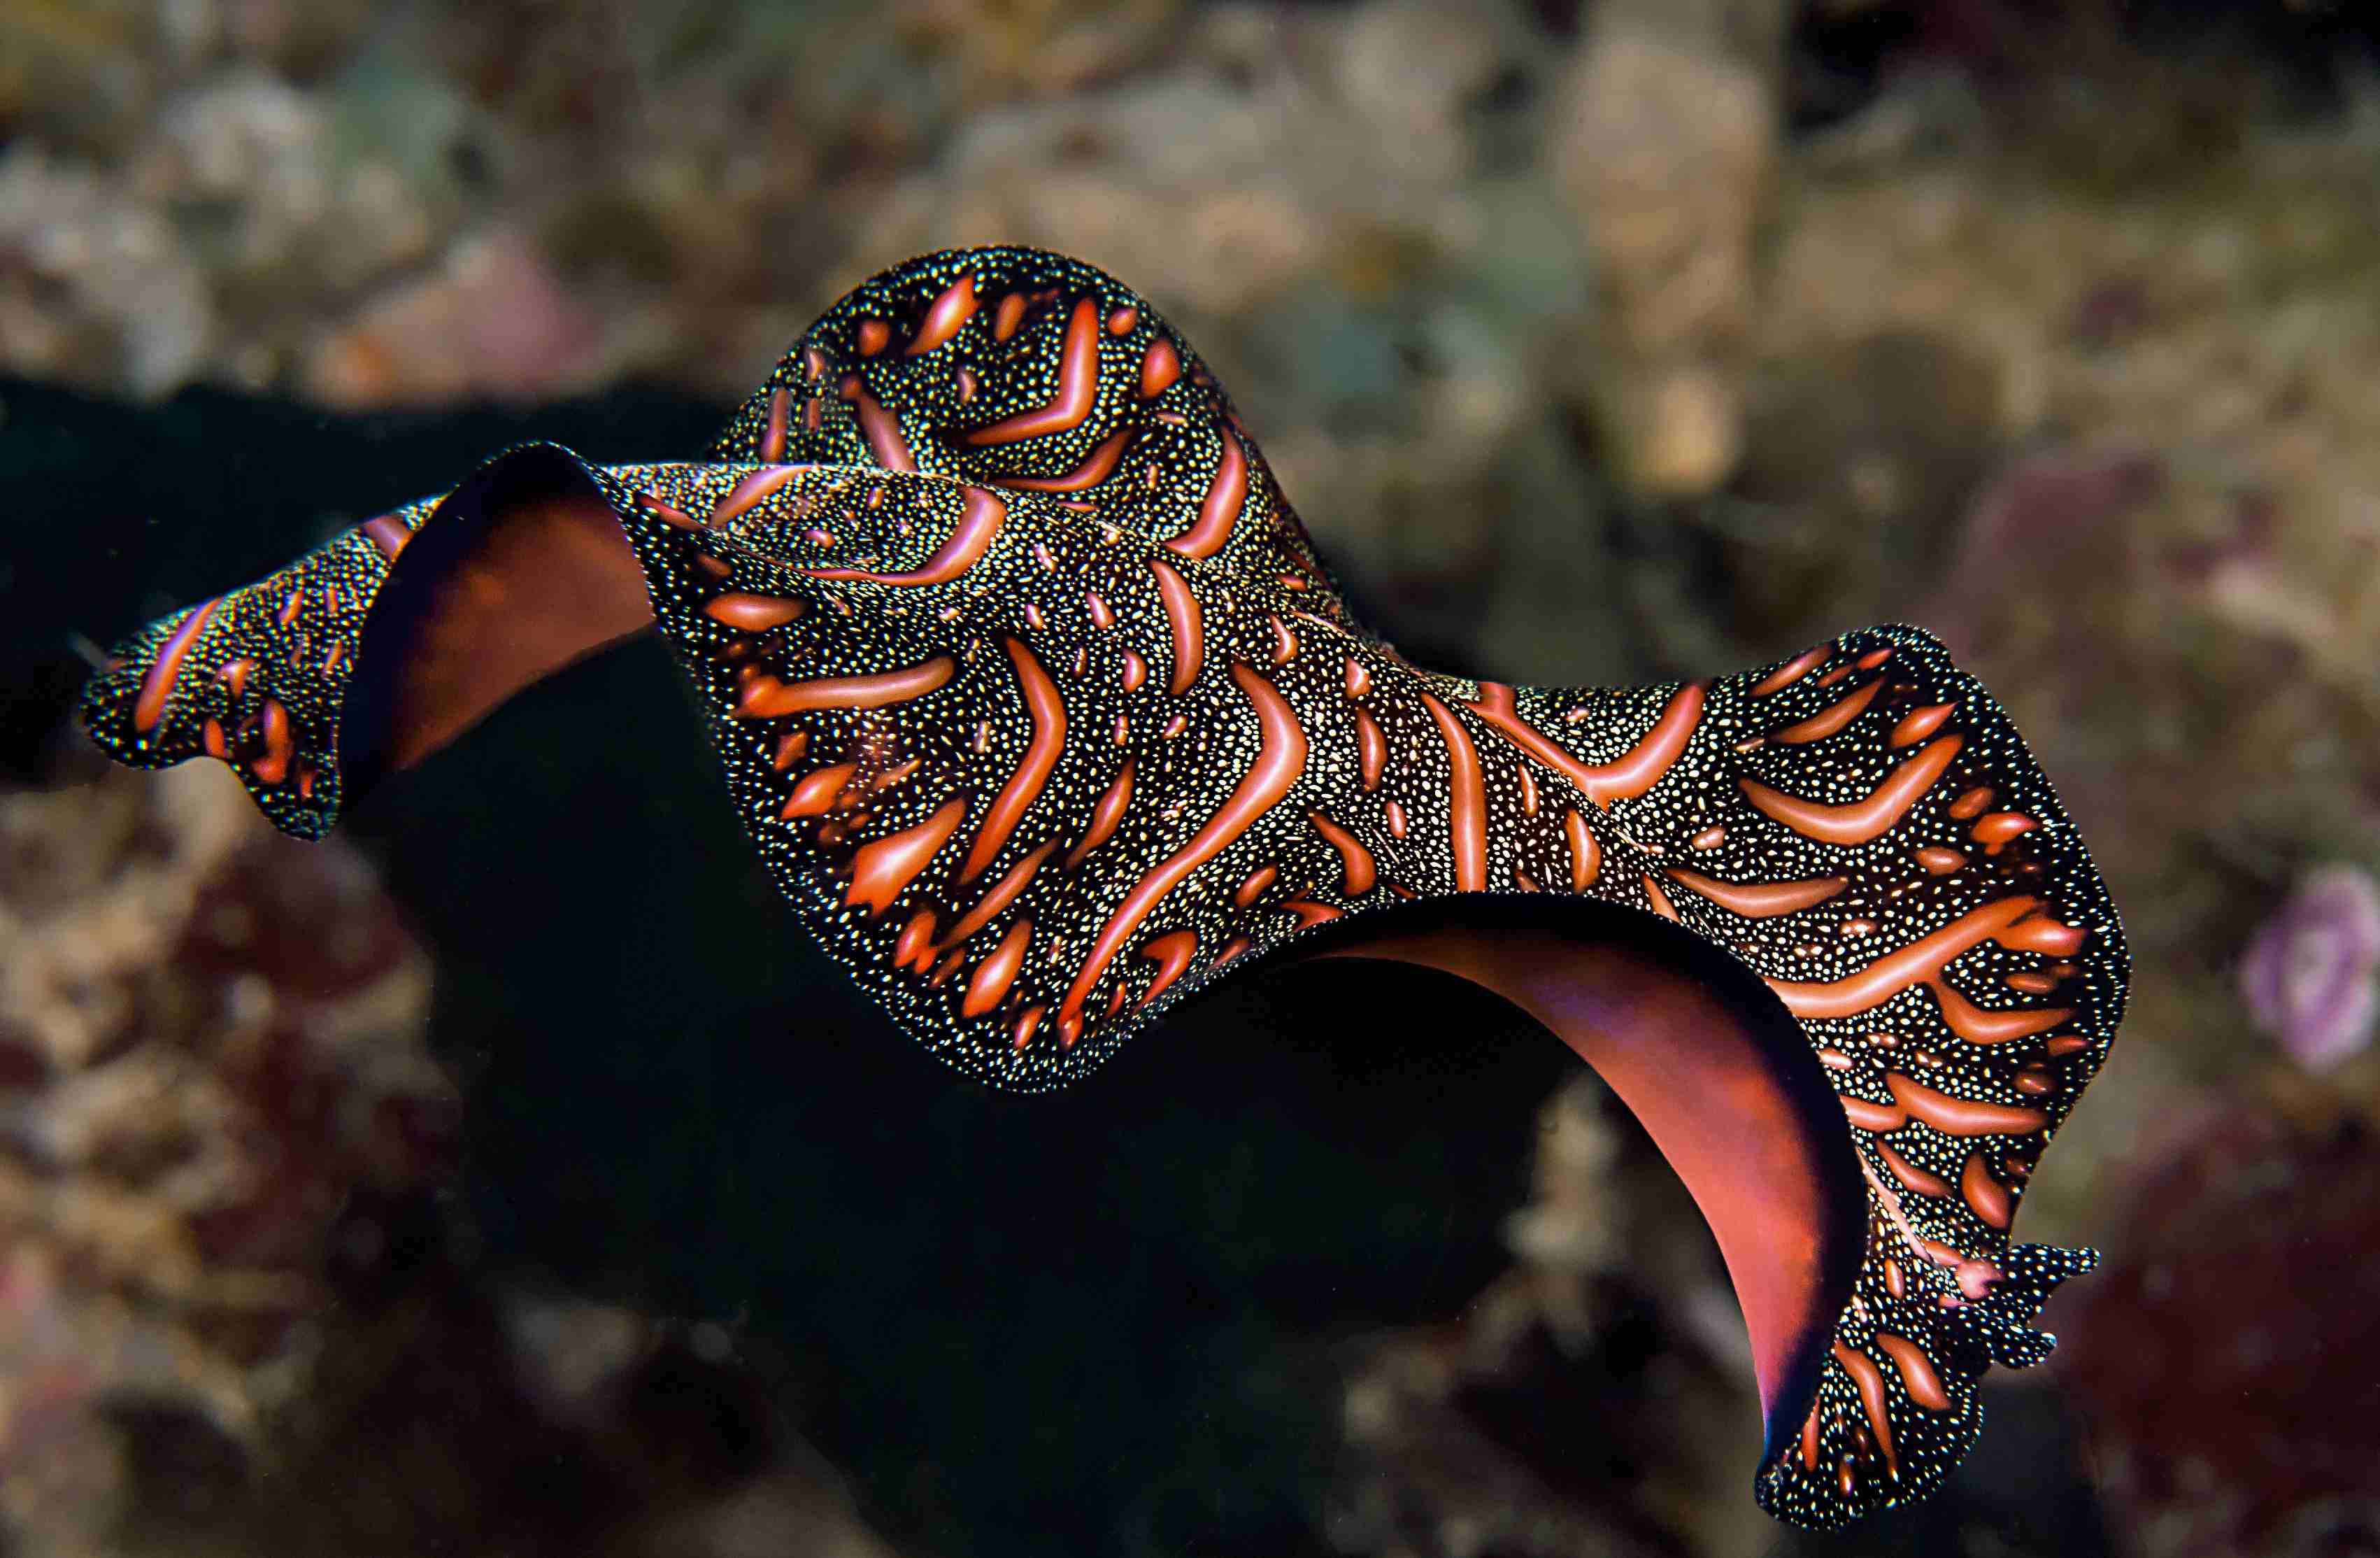 10-cool-facts-about-flatworms